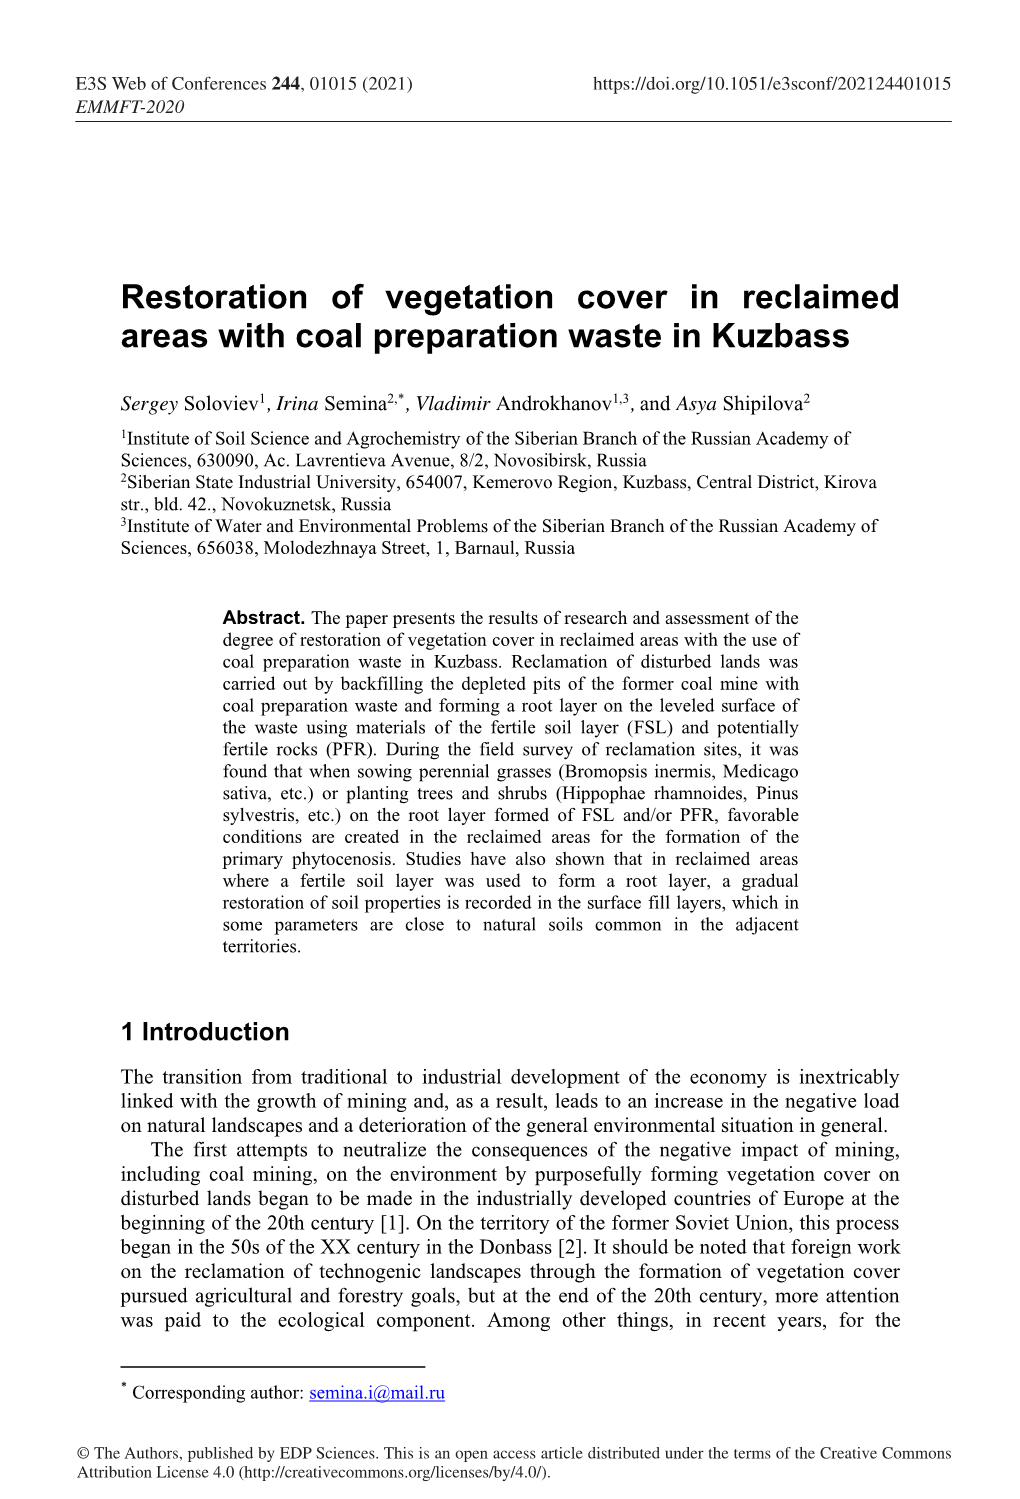 Restoration of Vegetation Cover in Reclaimed Areas with Coal Preparation Waste in Kuzbass